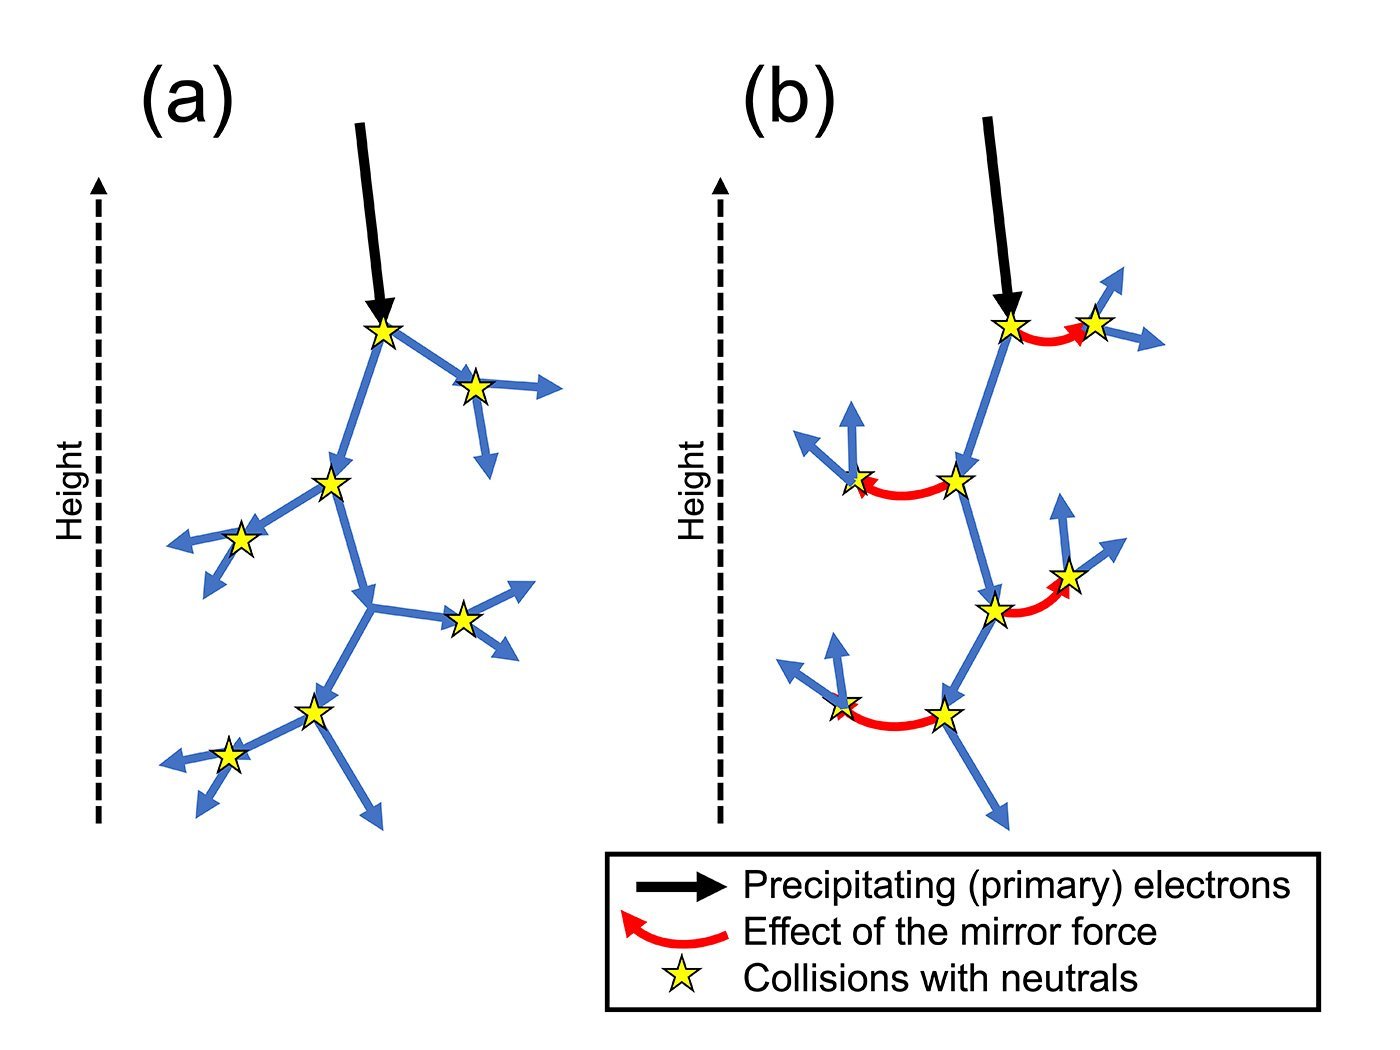 Illustration showing the relation between precipitating electrons, mirror force, and collisions with neutrals. The cases (a) without and (b) with mirror force are shown, indicating that the mirror force tends to move electrons upward through the collisions with neutrals. ©Yuto Katoh et al.